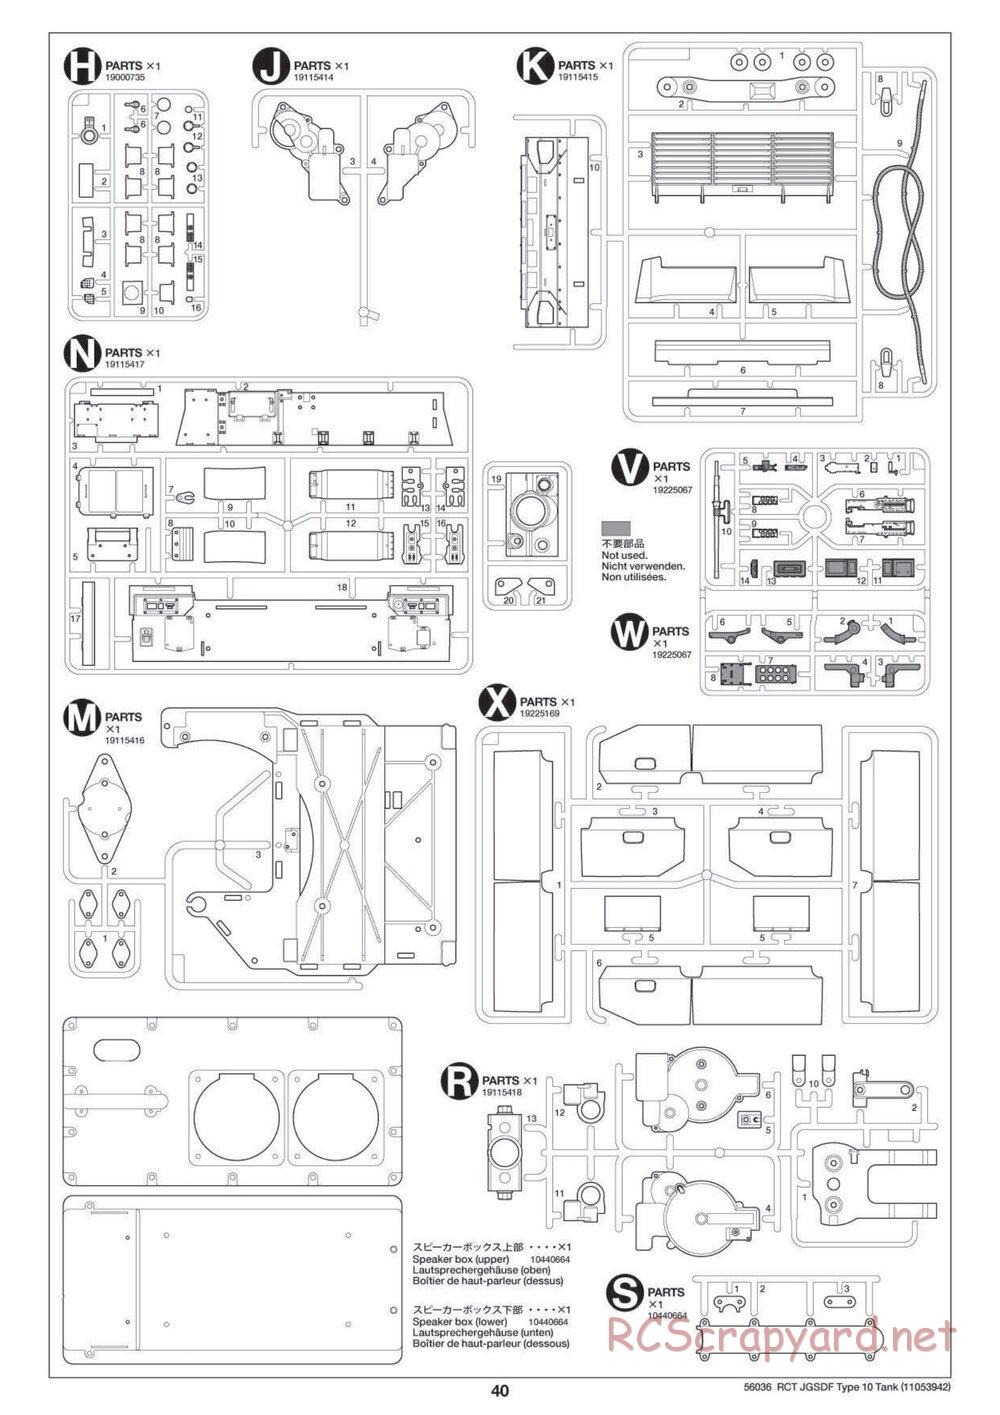 Tamiya - JGSDF Type 10 Tank - 1/16 Scale Chassis - Manual - Page 40